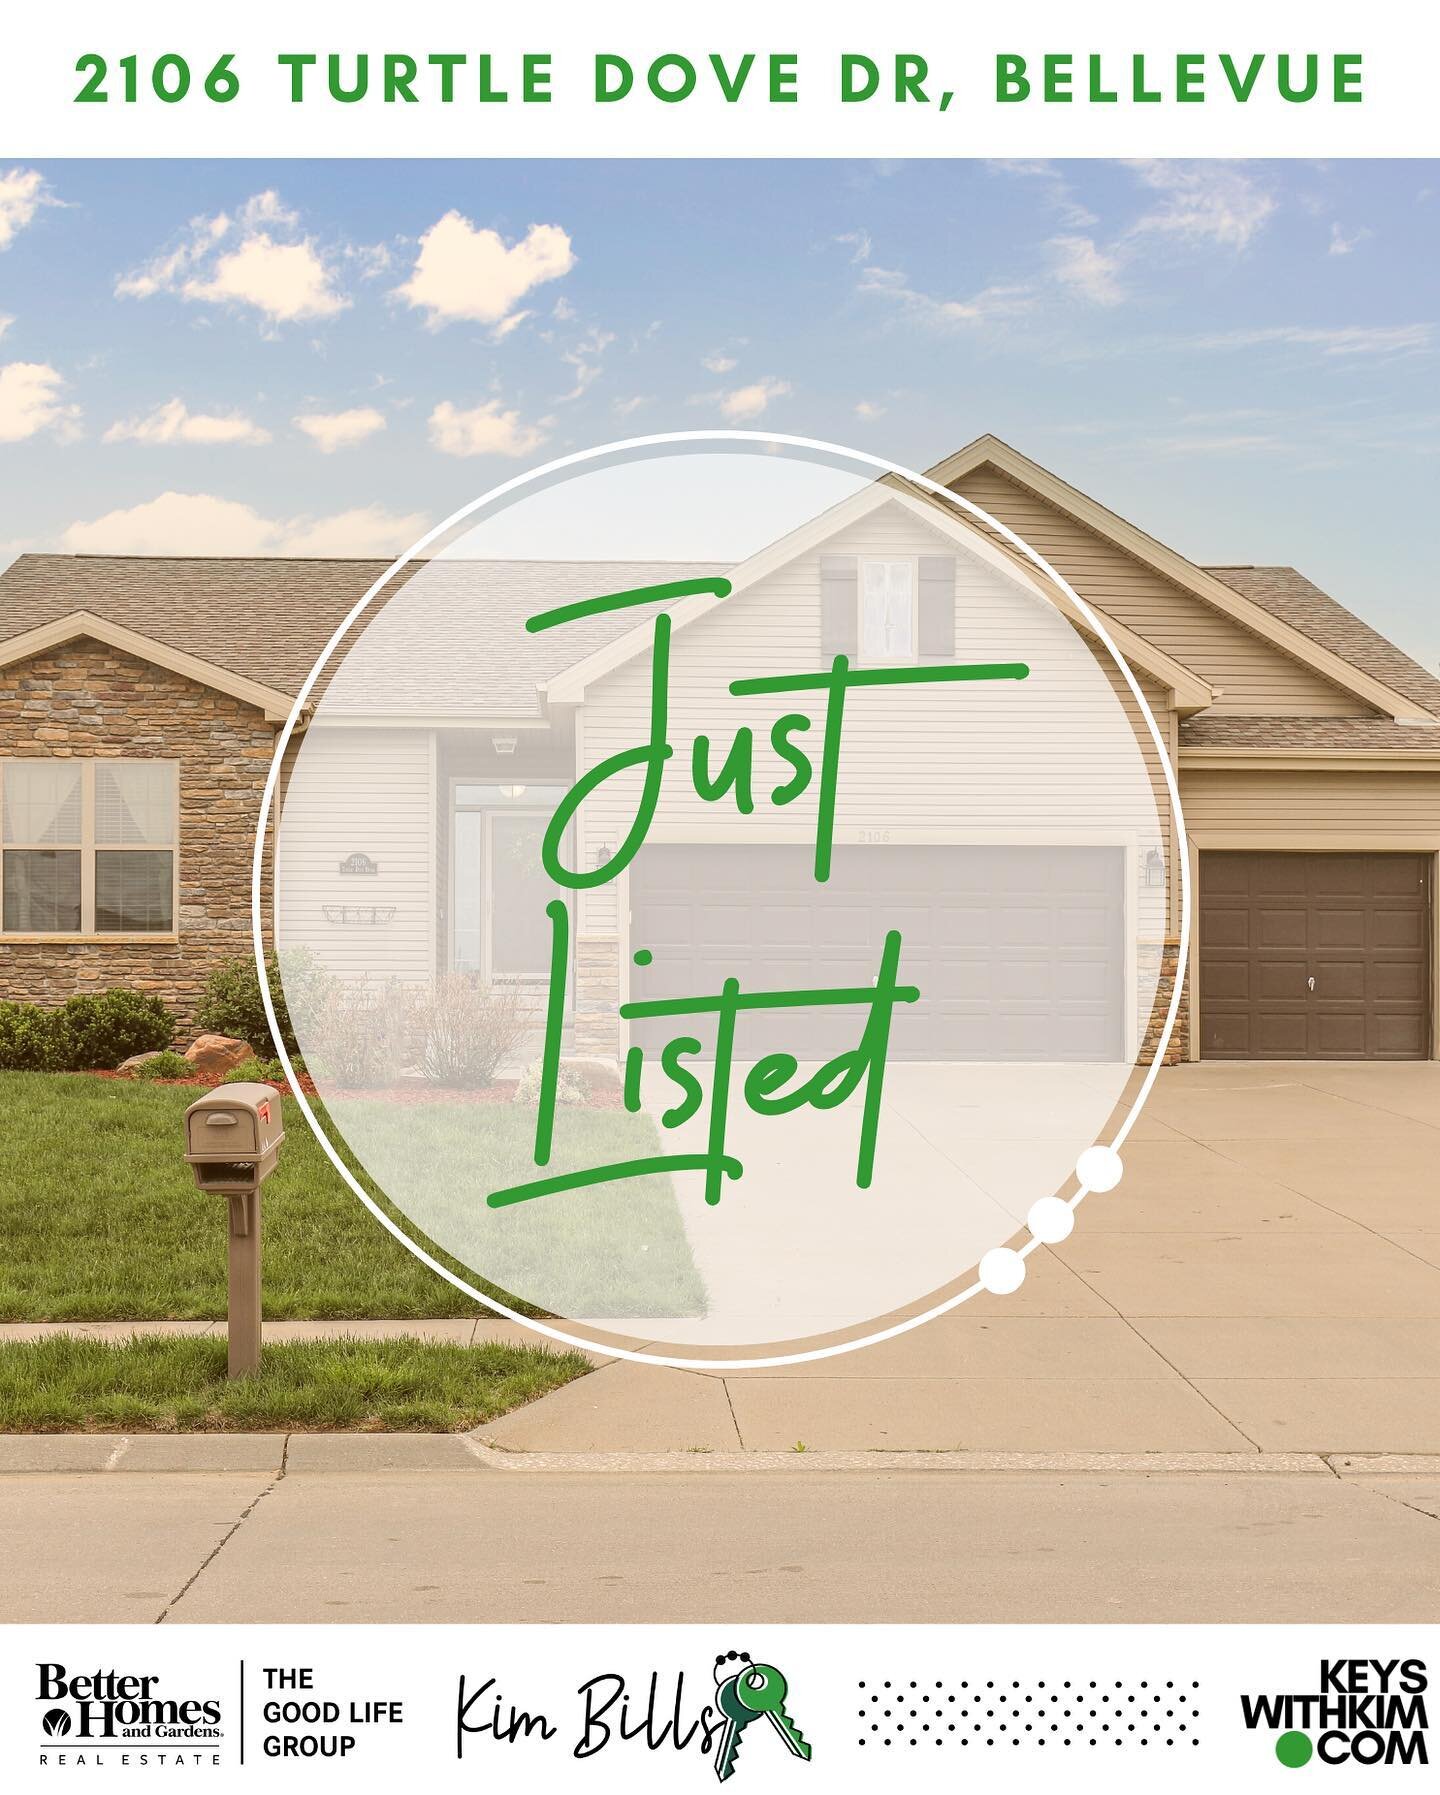 JUST LISTED!!!
2106 Turtle Dove Dr
$390,000

⚒️ Pre-Inspected!

✔️ South-facing ranch floorplan
✔️ 3,300+ finished square feet
✔️ 4 bedrooms, 3 bathrooms
✔️ Huge finished basement
✔️ Large patio with pergola
✔️ Flat, fully-fenced backyard
✔️ Minutes 